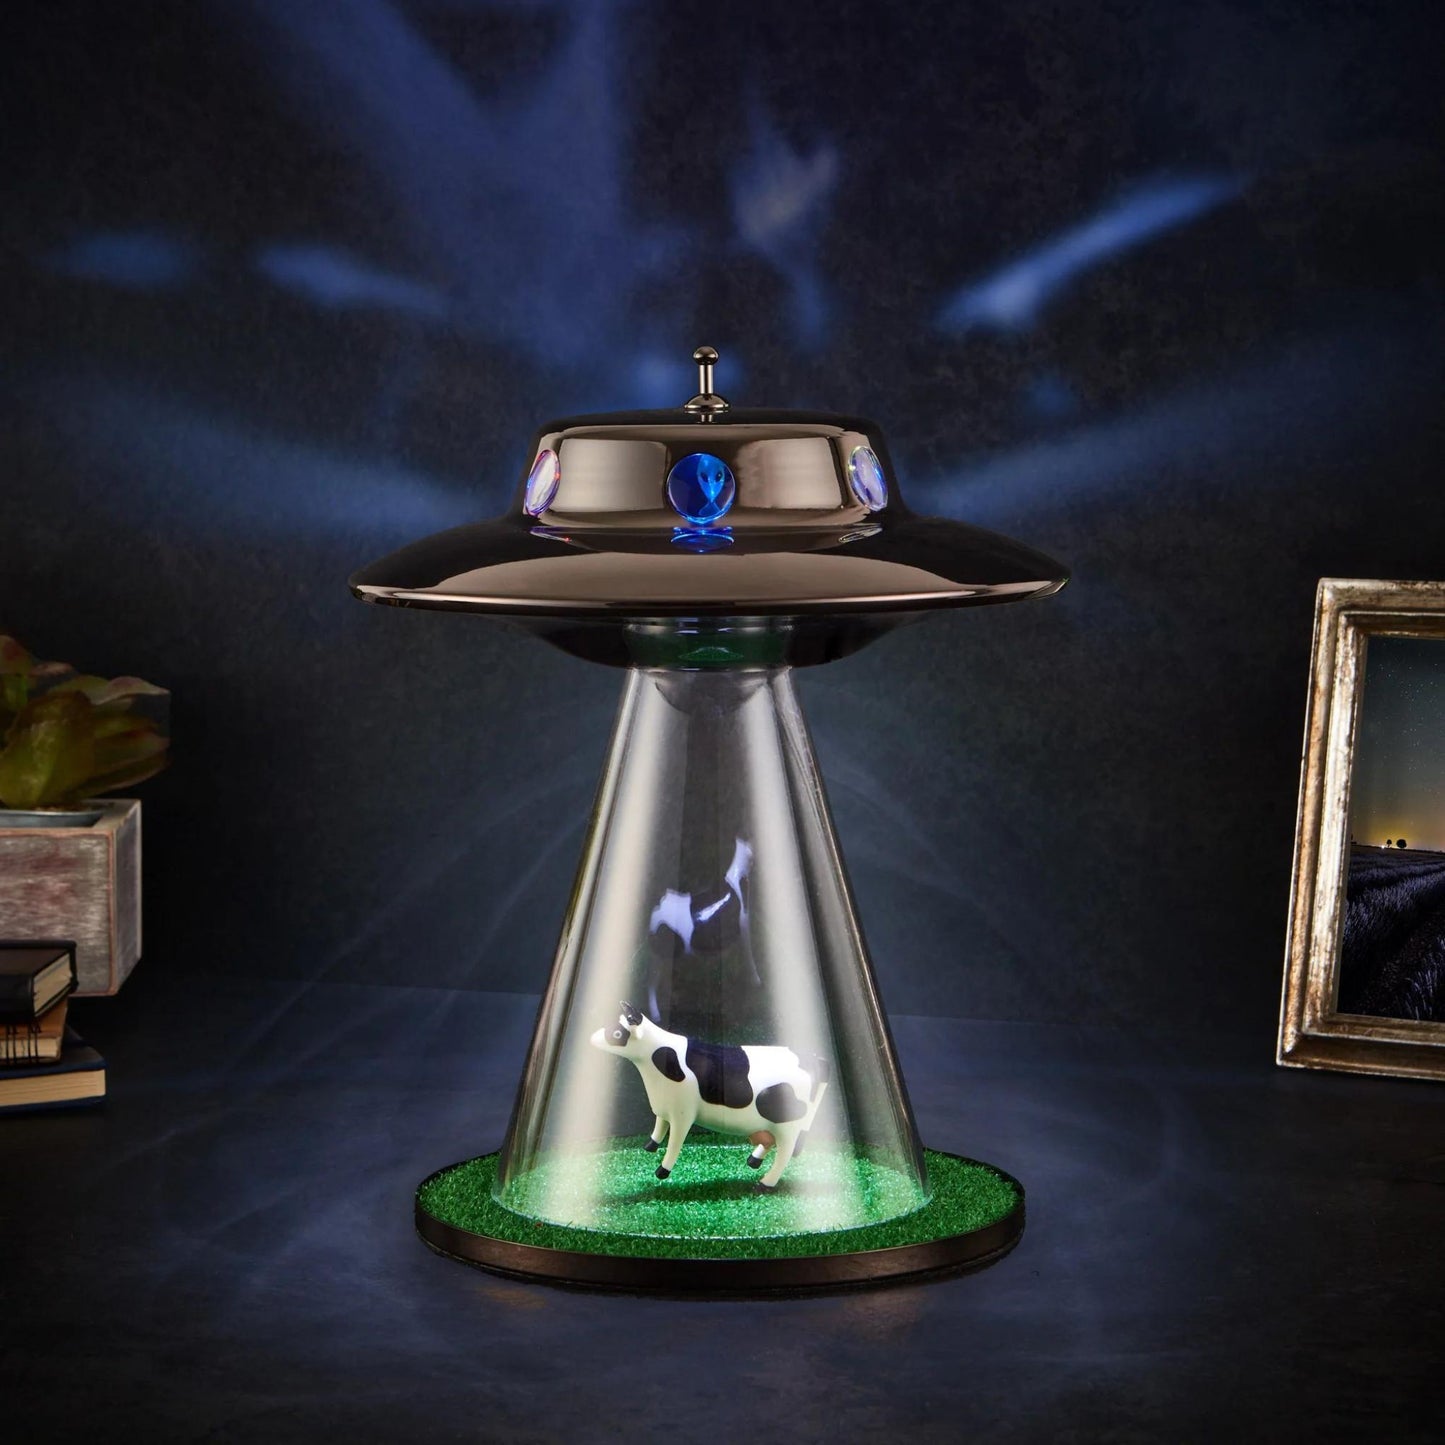 Purple LED - Original UFO Cow Lamp & amazon alien abduction table desk lamp with grass, cow and flying UFO saucer LED RGB night light